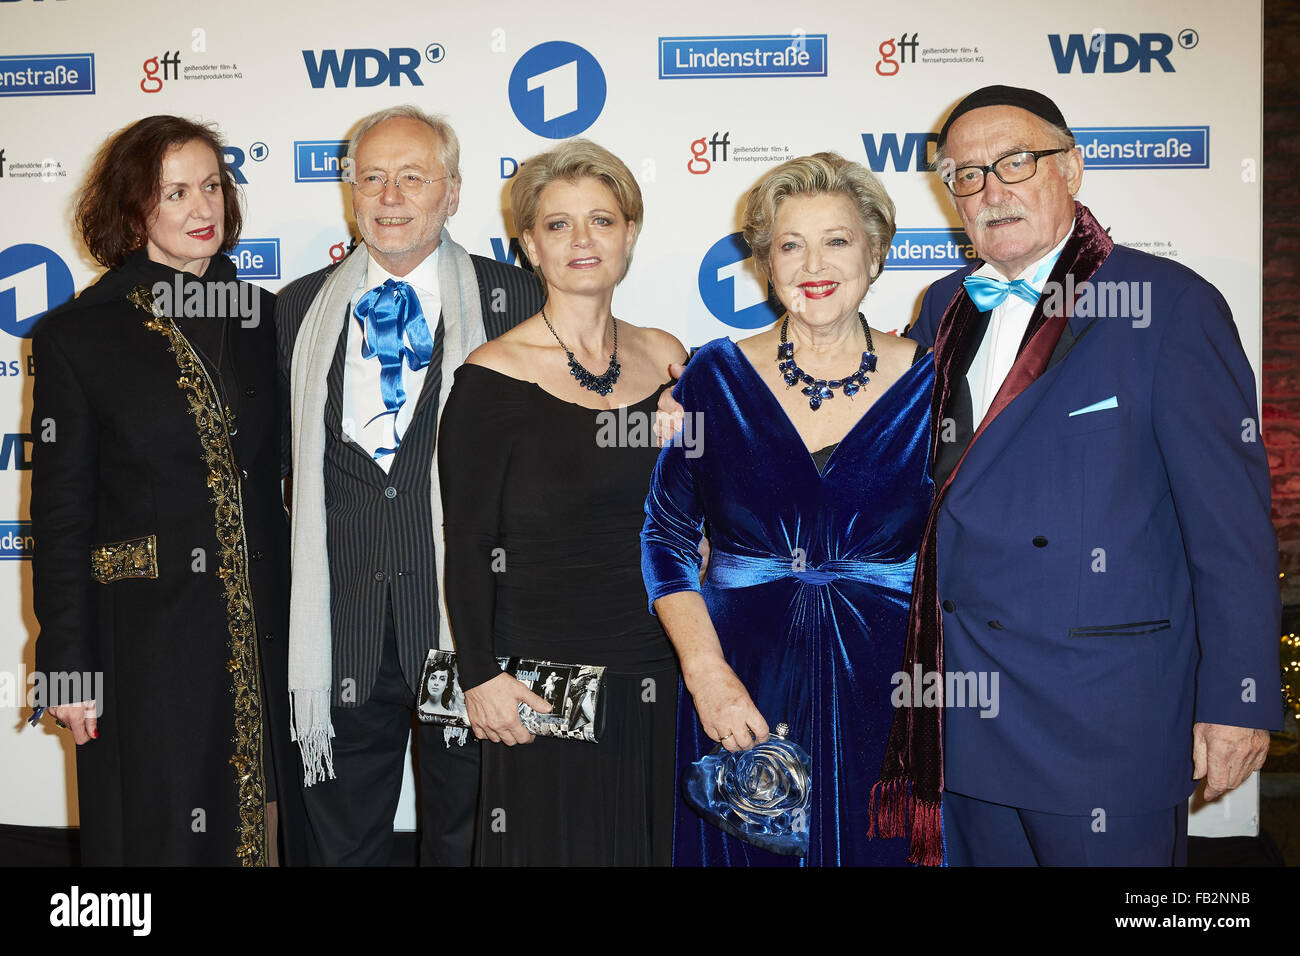 Photocall for the 30th anniversary of German ARD TV series 'Lindenstrasse'.  Featuring: Irene Fischer, Joachim H. Luger, Andrea Spatzek, Marie-Luise Marjan, Hans W. Geißendörfer Where: Cologne, Germany When: 08 Dec 2015 Stock Photo